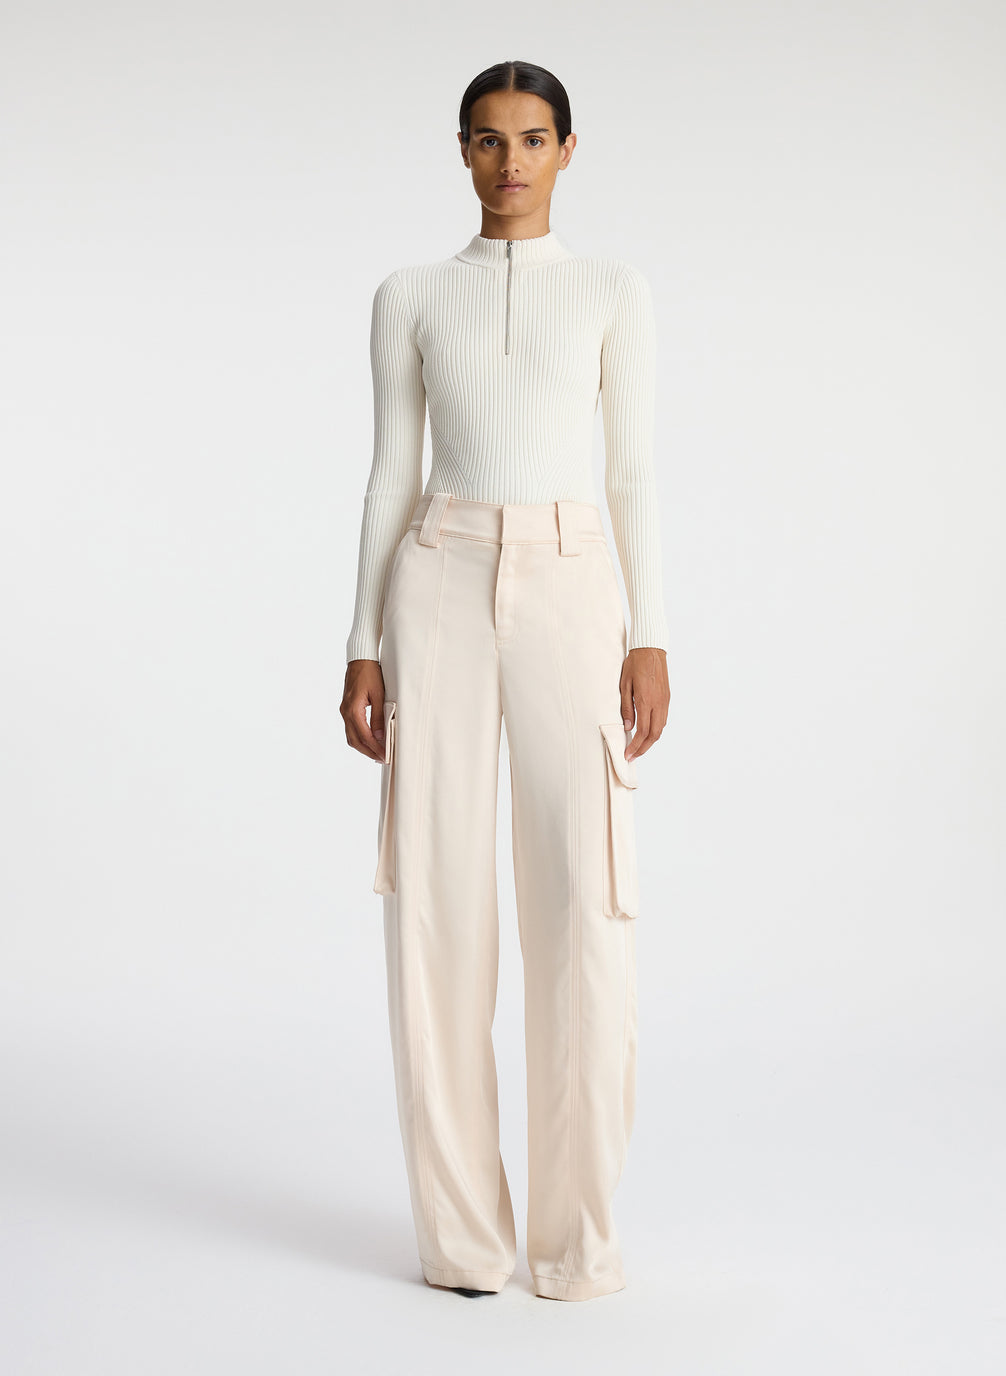 front view of woman wearing white half zip mock neck long sleeve knit top and off white satin cargo pants